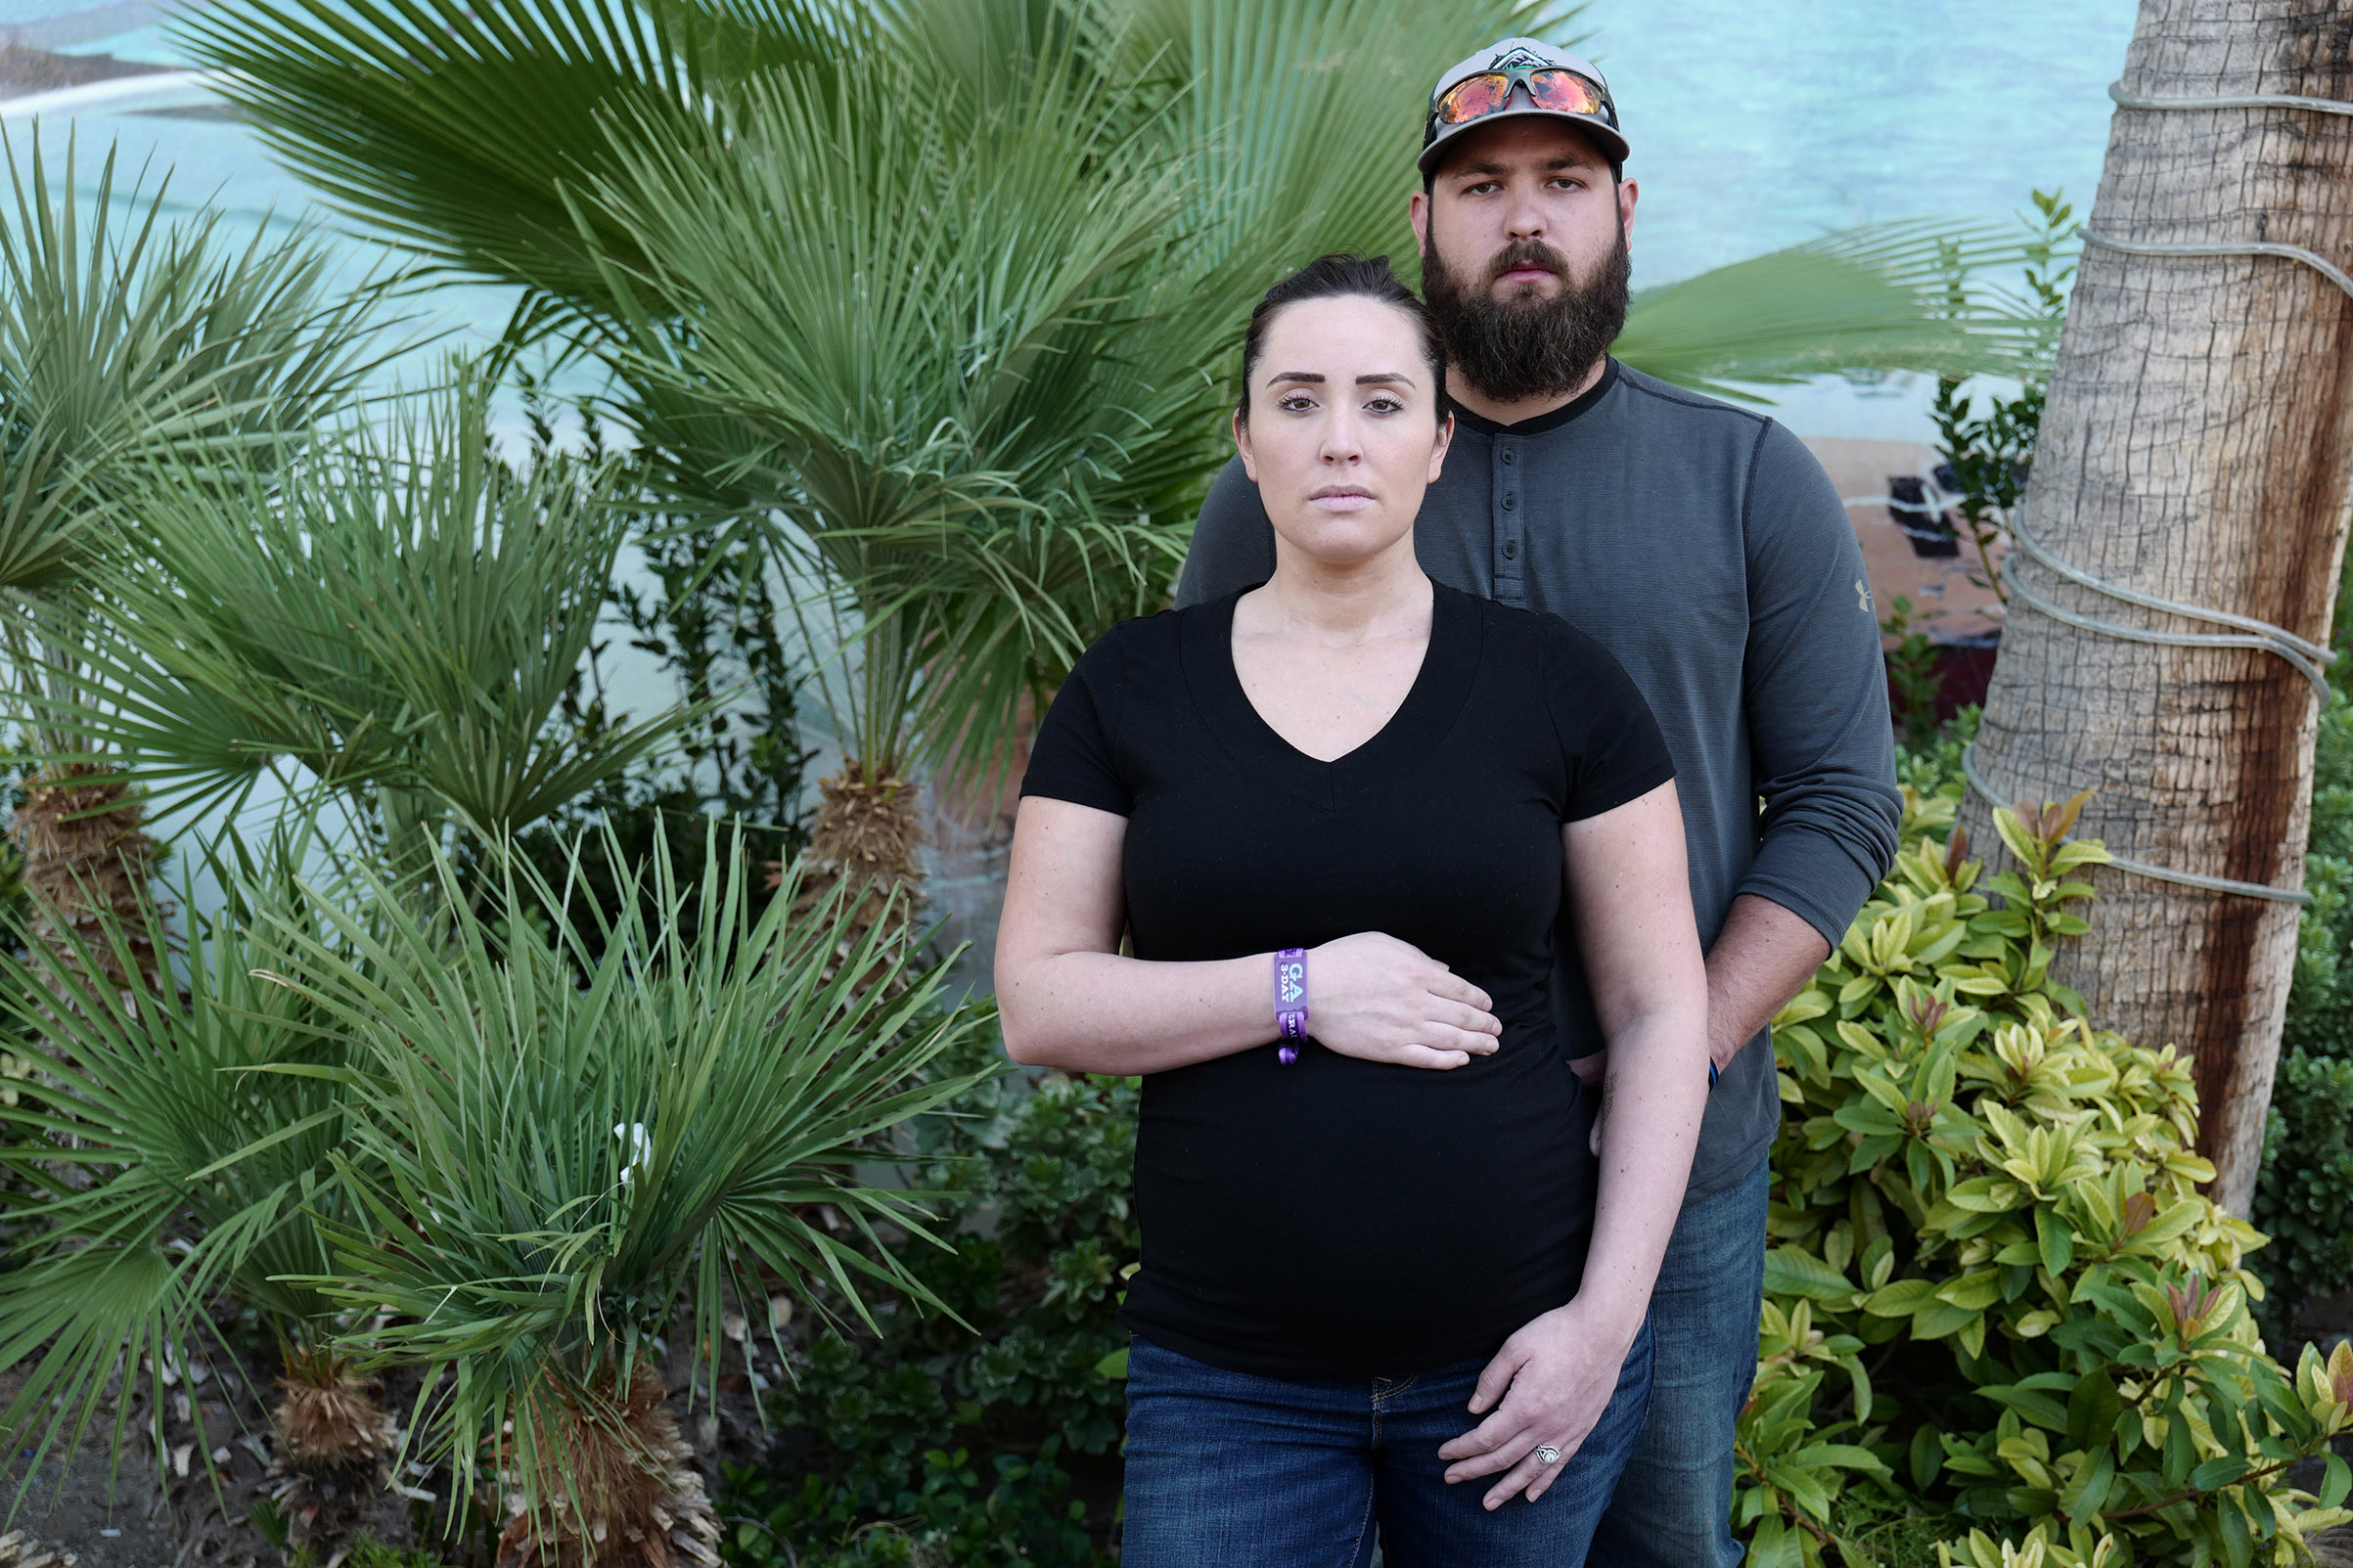 Kelsey Clark, age 25, (8 months pregnant), and husband Toby Clark, age 27, from Olympia, Washington, photographed in Las Vegas, Oct. 3, 2017. (Matt Stuart—Magnum for TIME)